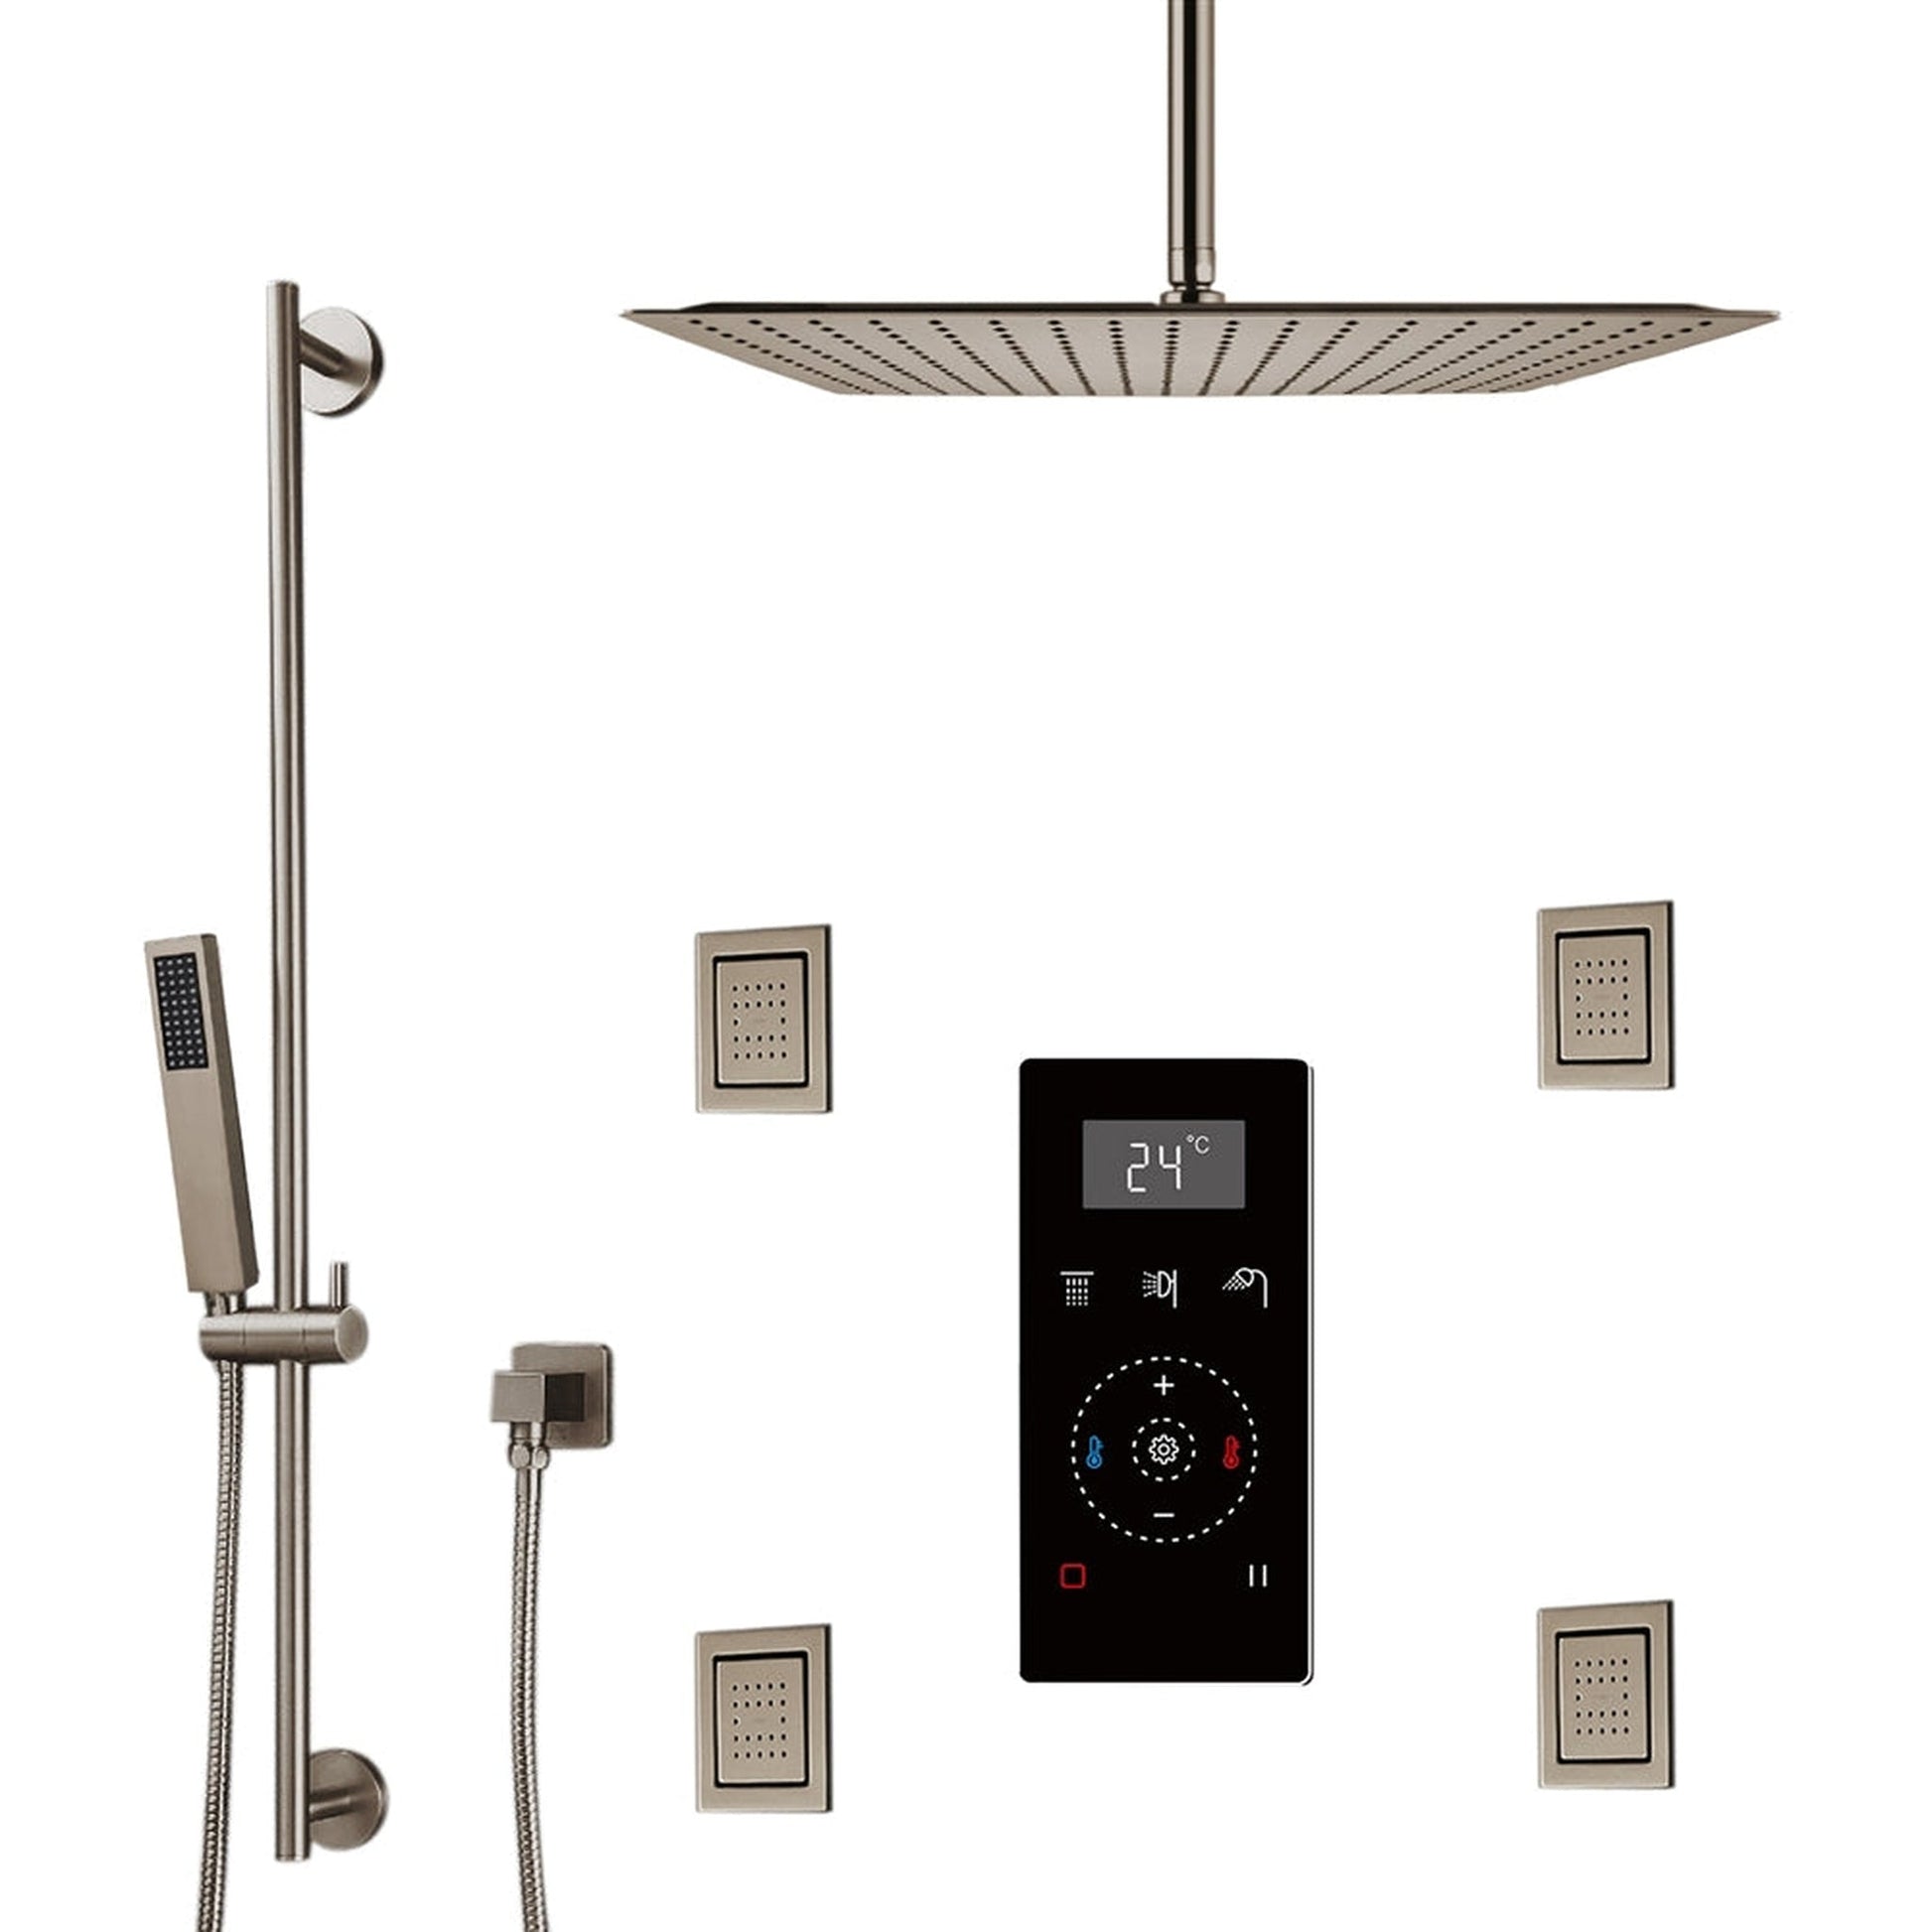 Fontana 10" Brushed Nickel Ceiling Mounted Rainfall Digital Control Shower System With 4-Jet Body Sprays, Hand Shower and Water Powered LED Lights